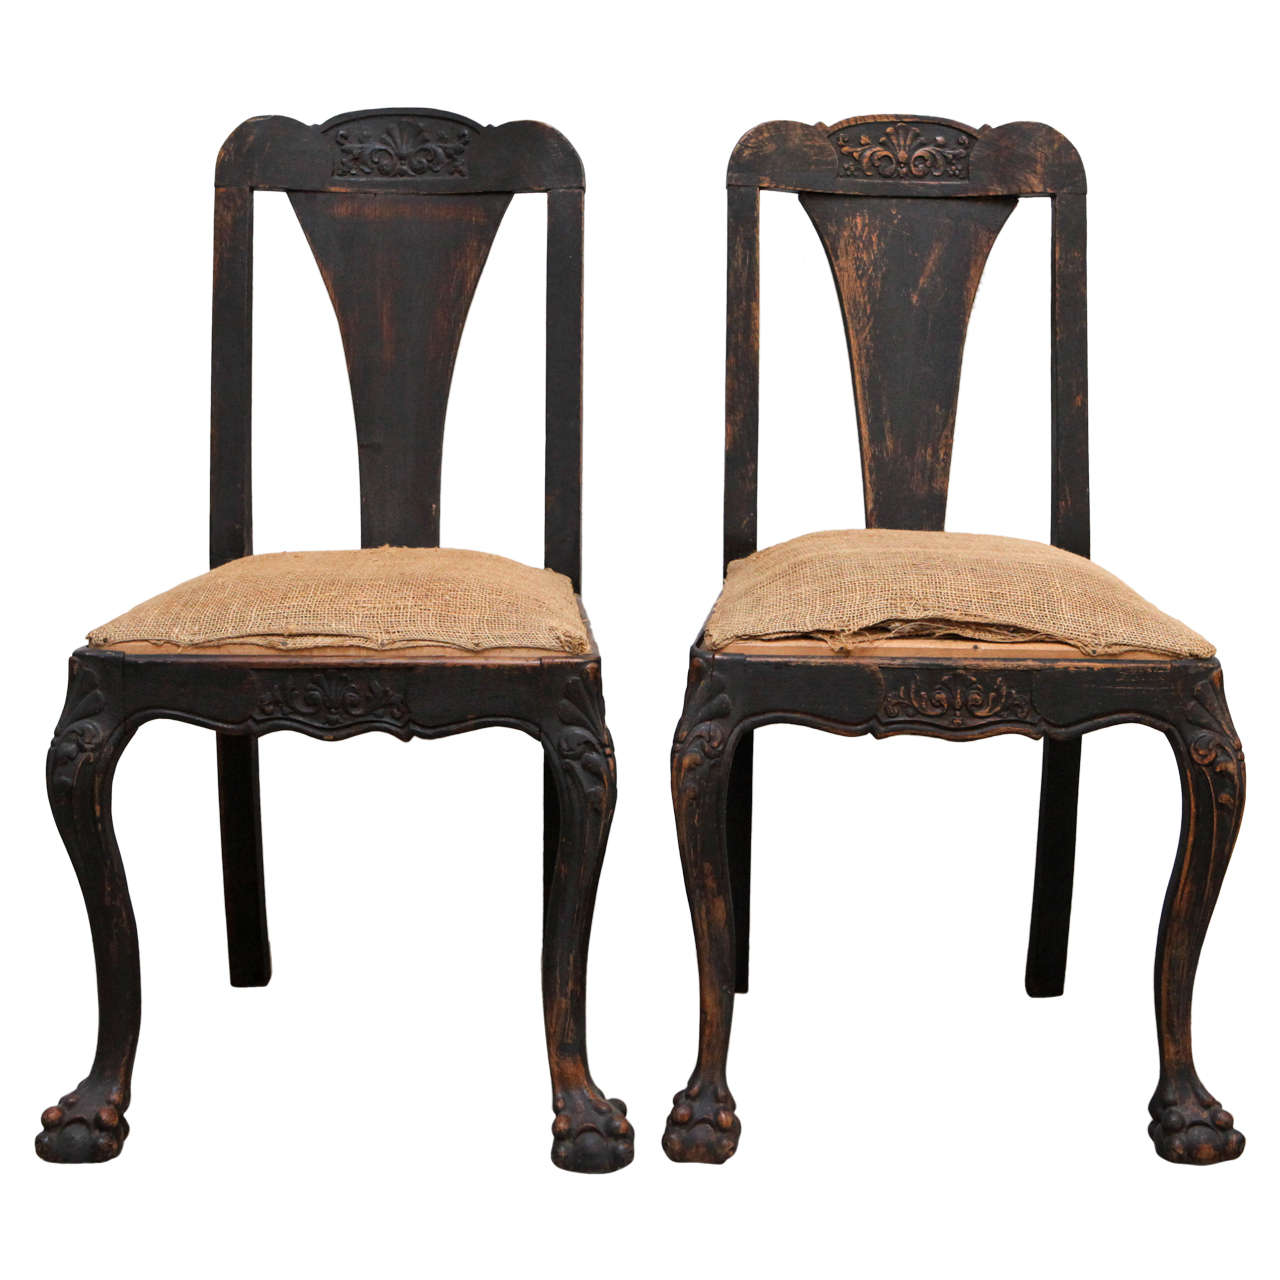 Pair of Baroque Hall Chairs, Late 18th c.